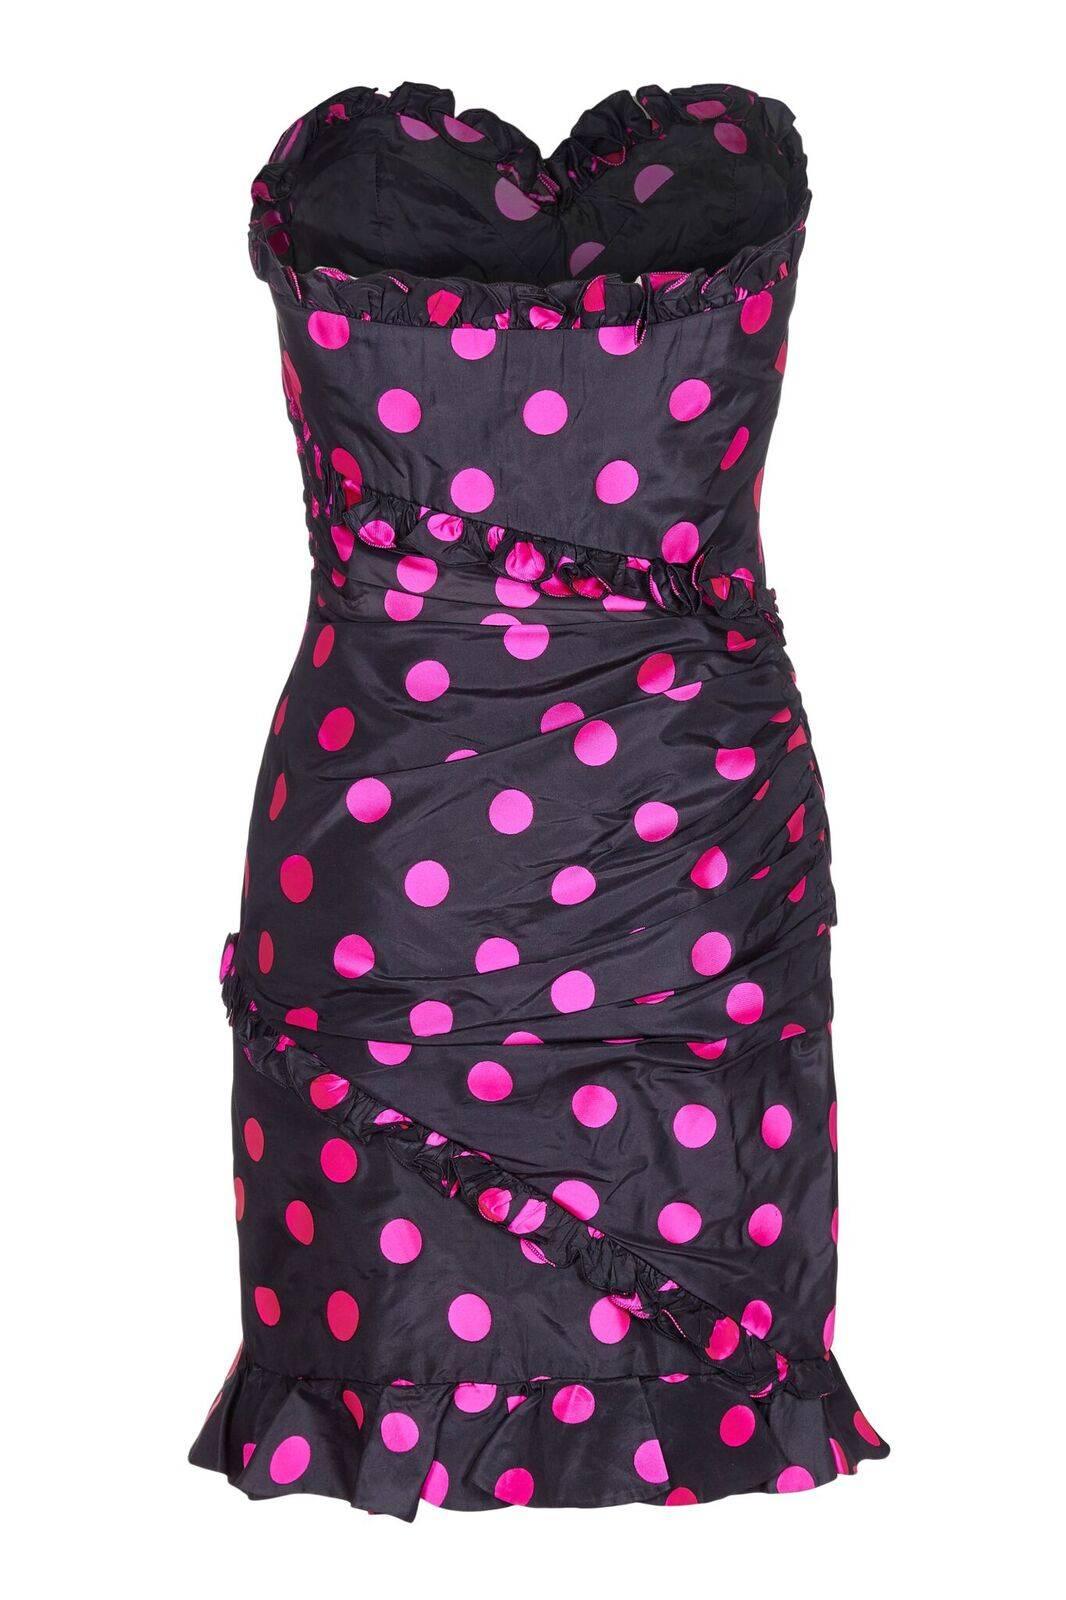 This fantastic Emanuel Ungaro 1980's silk taffeta polka dot off-shoulder cocktail dress is guaranteed to turn heads! A superb example of the innovative tailoring and youthful flare synonymous with its designer, the dress has wonderful construction